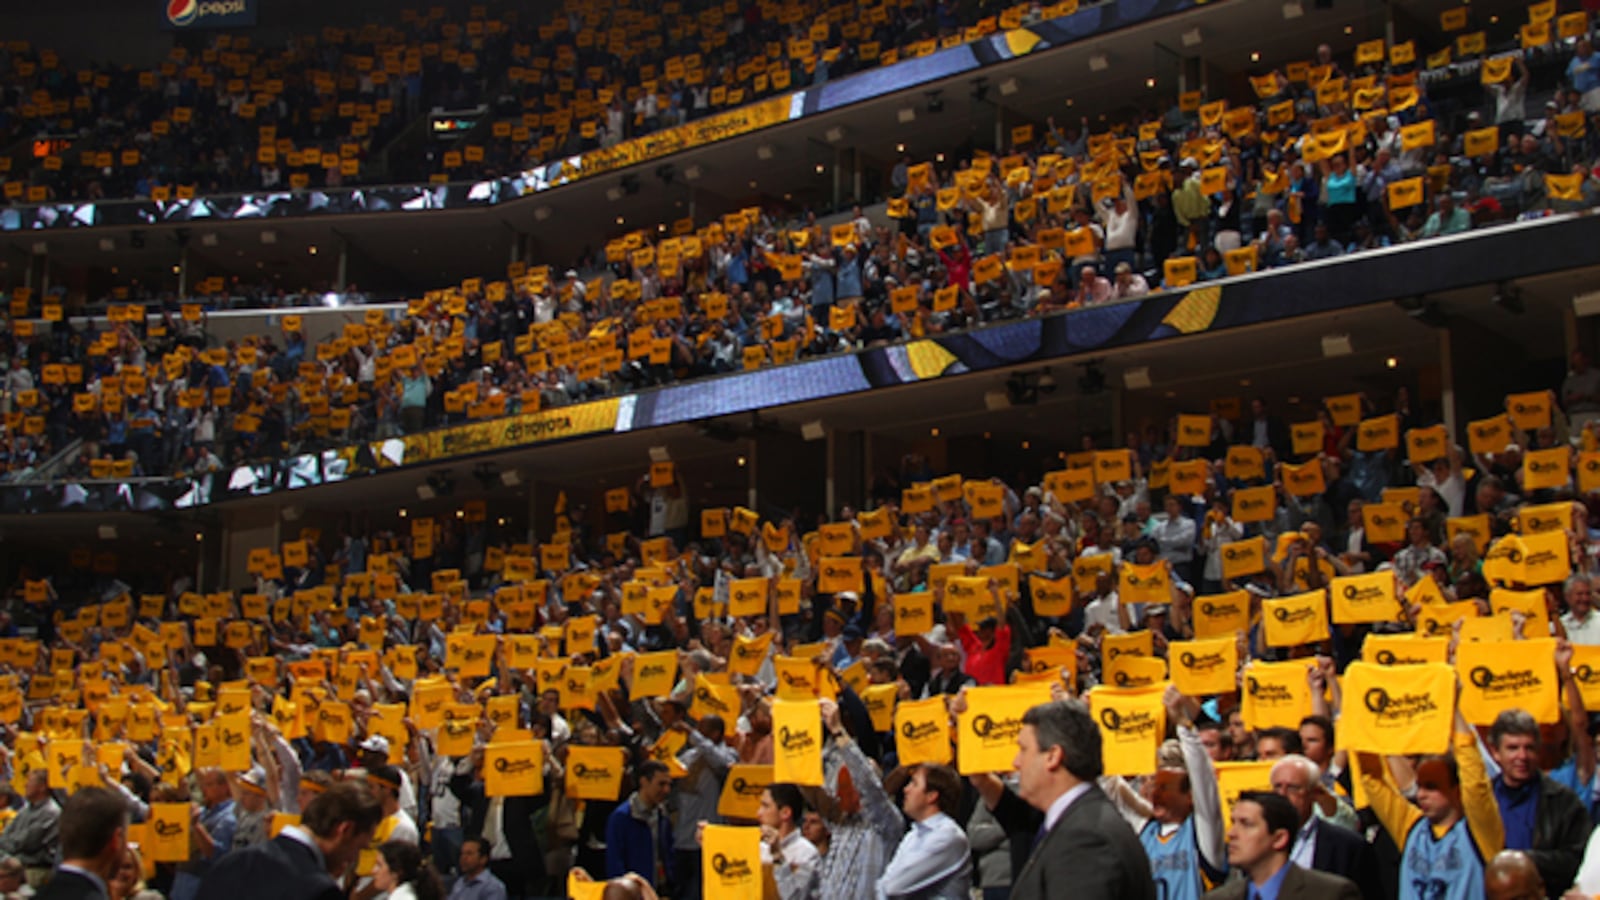 Memphis Grizzlies fans raise their growl towels during an NBA game at the FedEx Forum on April 25, 2013.